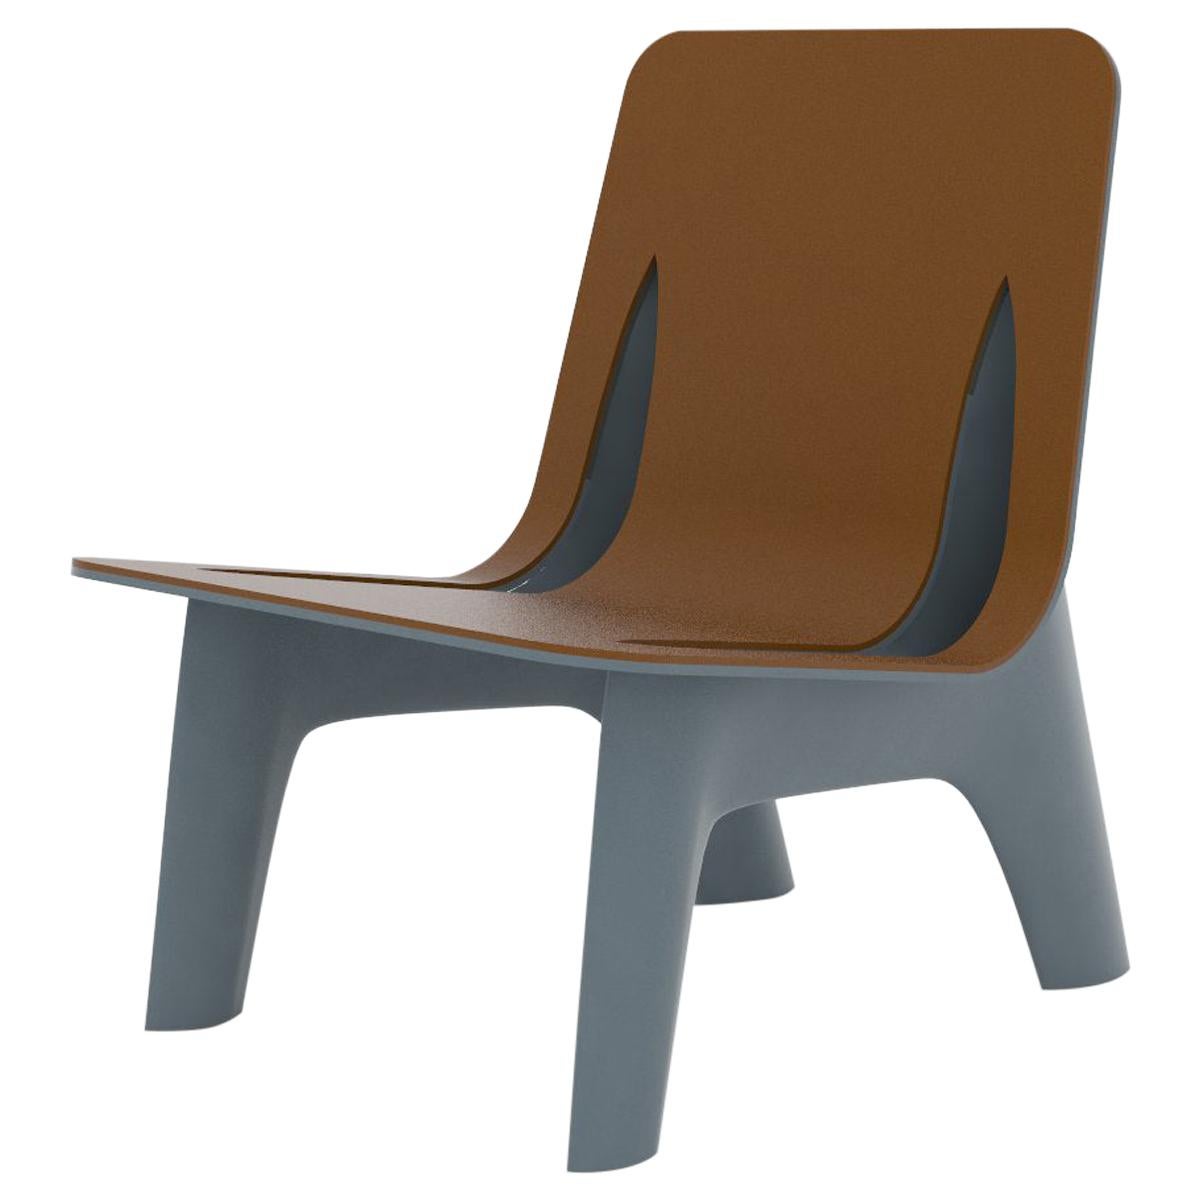 J-Chair Lounge Polished Grey Blue Color Aluminum and Leather Seating by Zieta